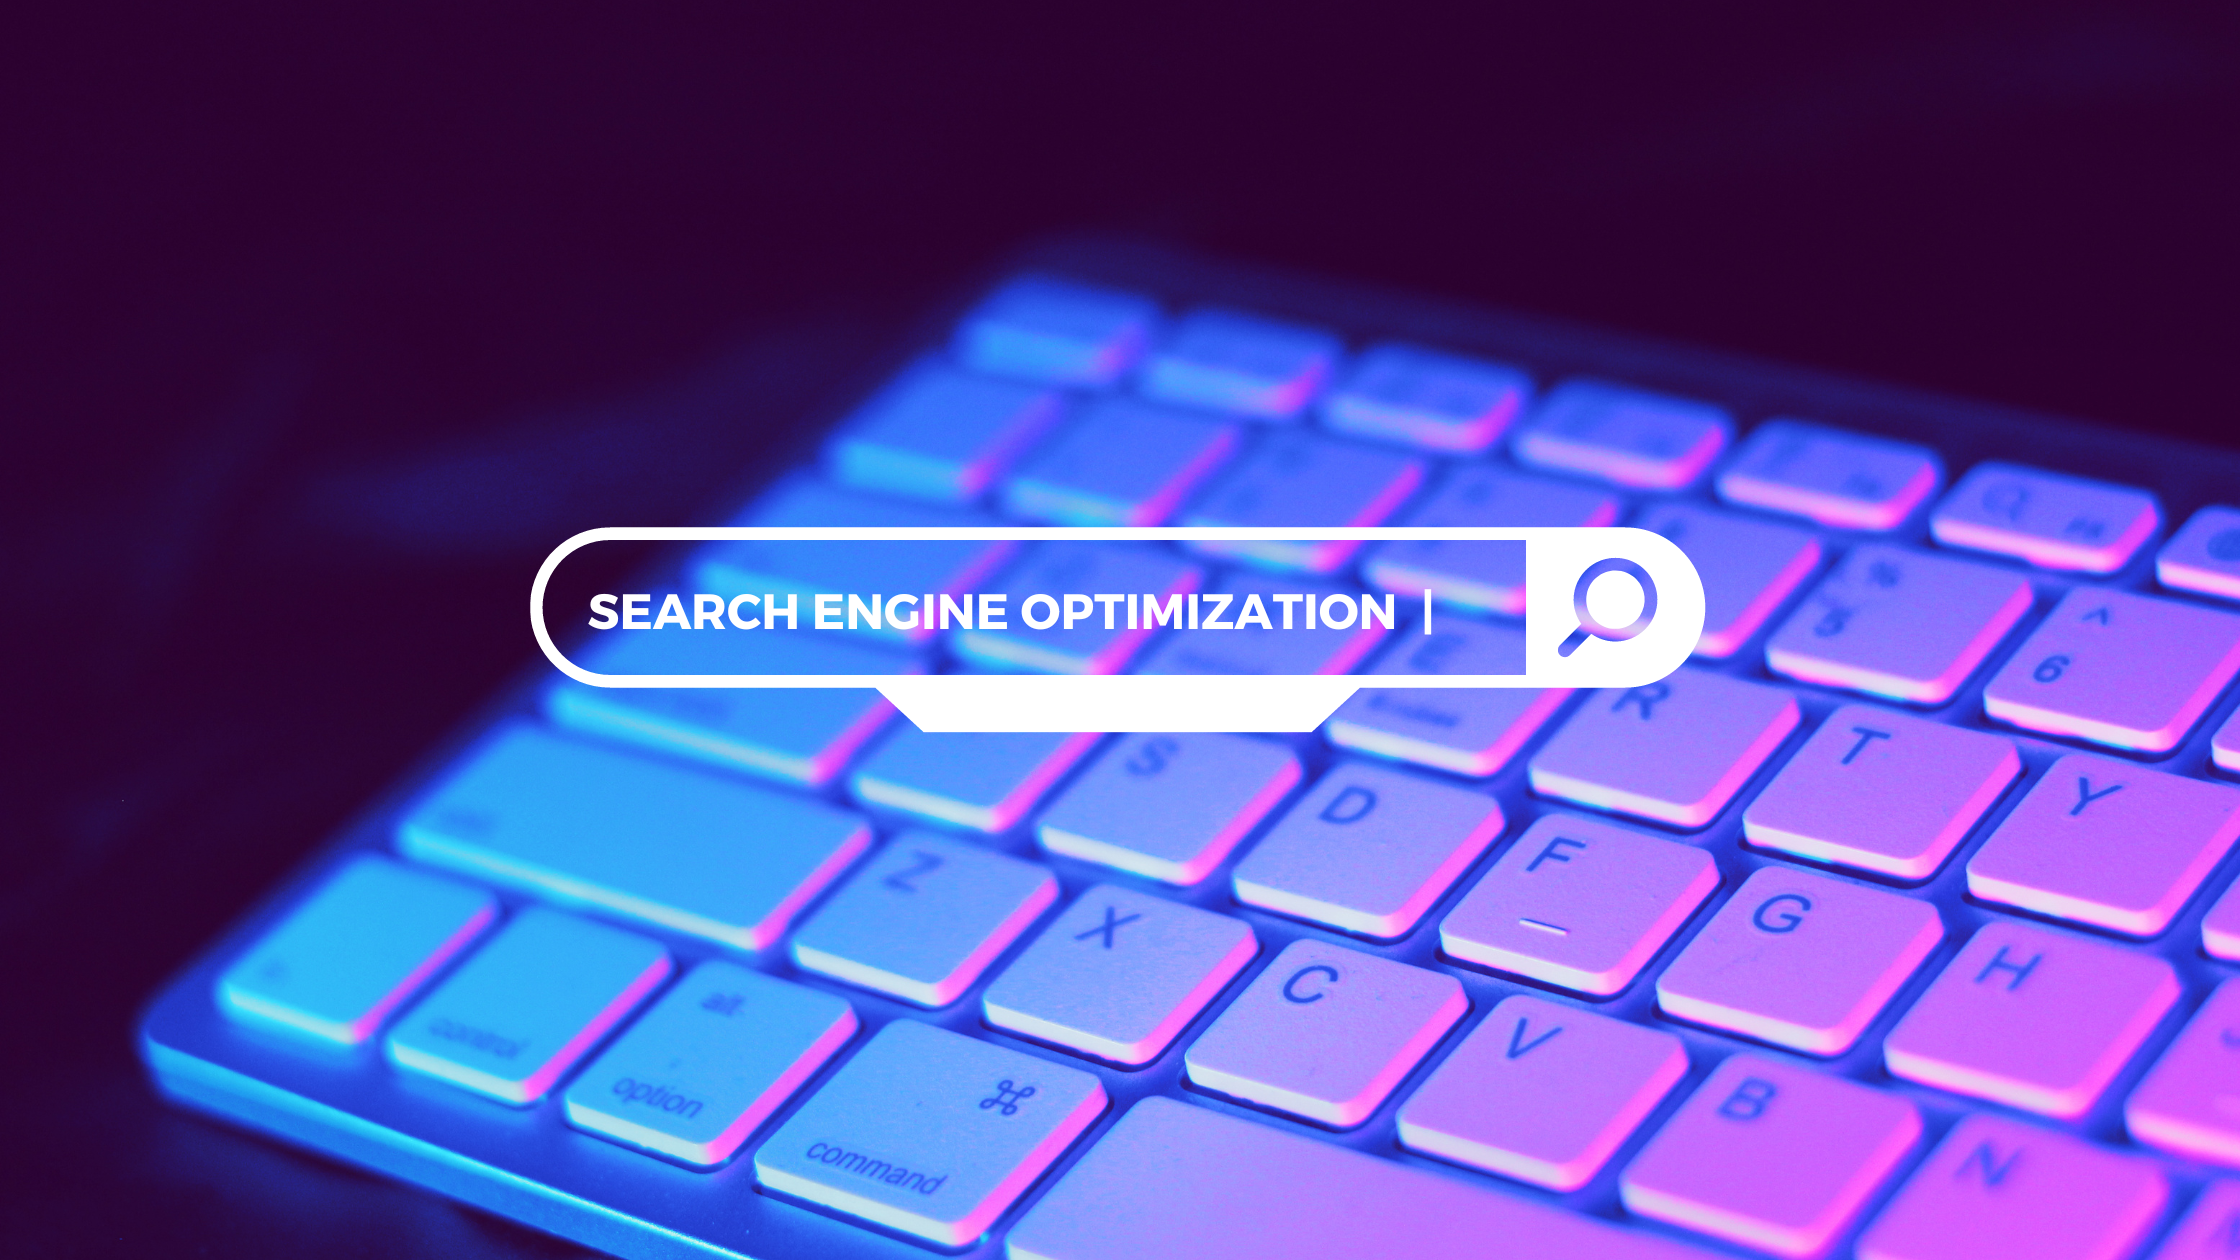 Computer keyboard and search bar with "SEARCH ENGINE OPTIMIZATION" typed in for keyword research and analysis